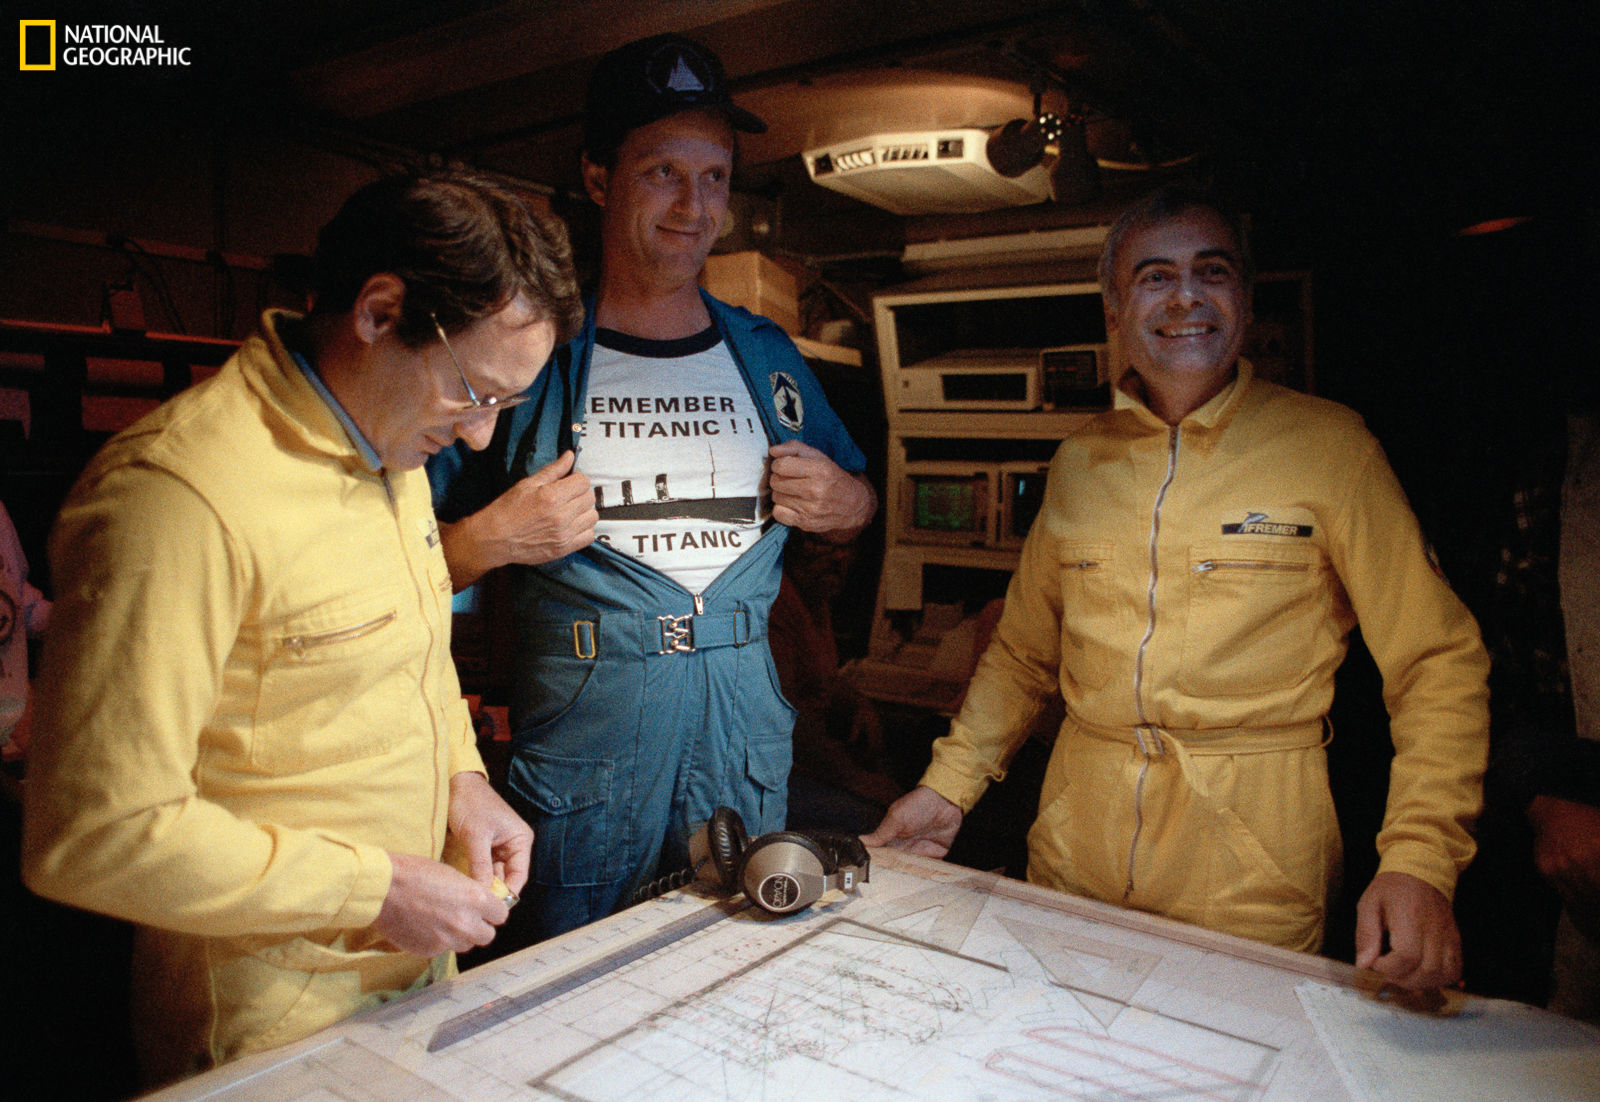 Titanic expedition members pore over blueprints of the R.M.S. Titanic.  A joint expedition by the Woods Hole Oceanographic Institution and the Institut Franca is de Recherches pour L'exploitation des Mers was formed to find the Titanic's final resting place.  The chief scientist of the Woods Hole contingent was Robert D. Ballard, here proudly displaying a commemorative expedition t-shirt. (Emory Kristof/National Geographic)